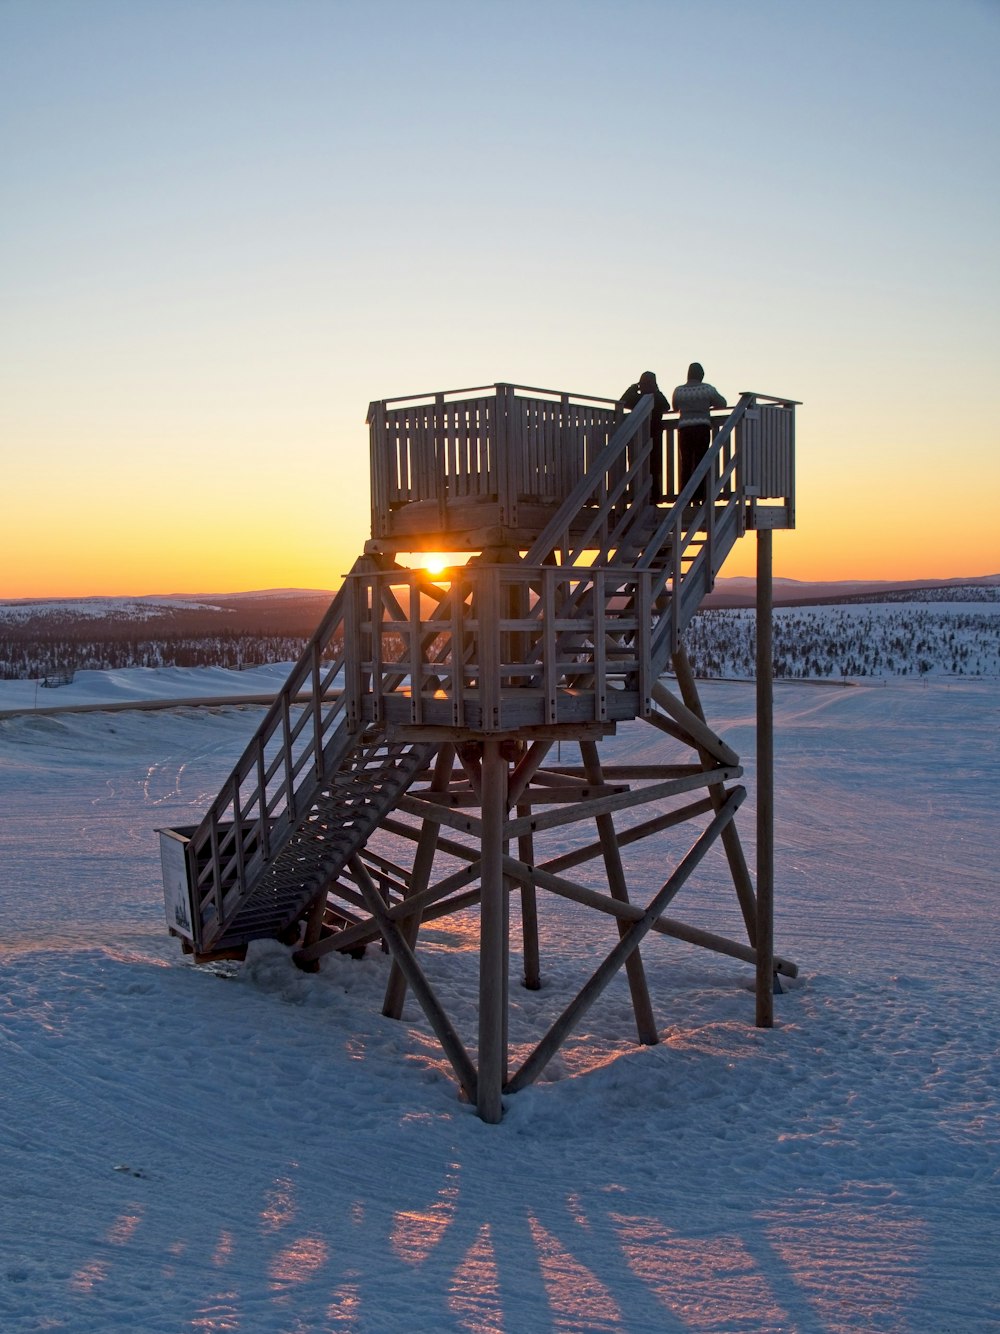 a lifeguard tower sitting in the middle of a snow covered field